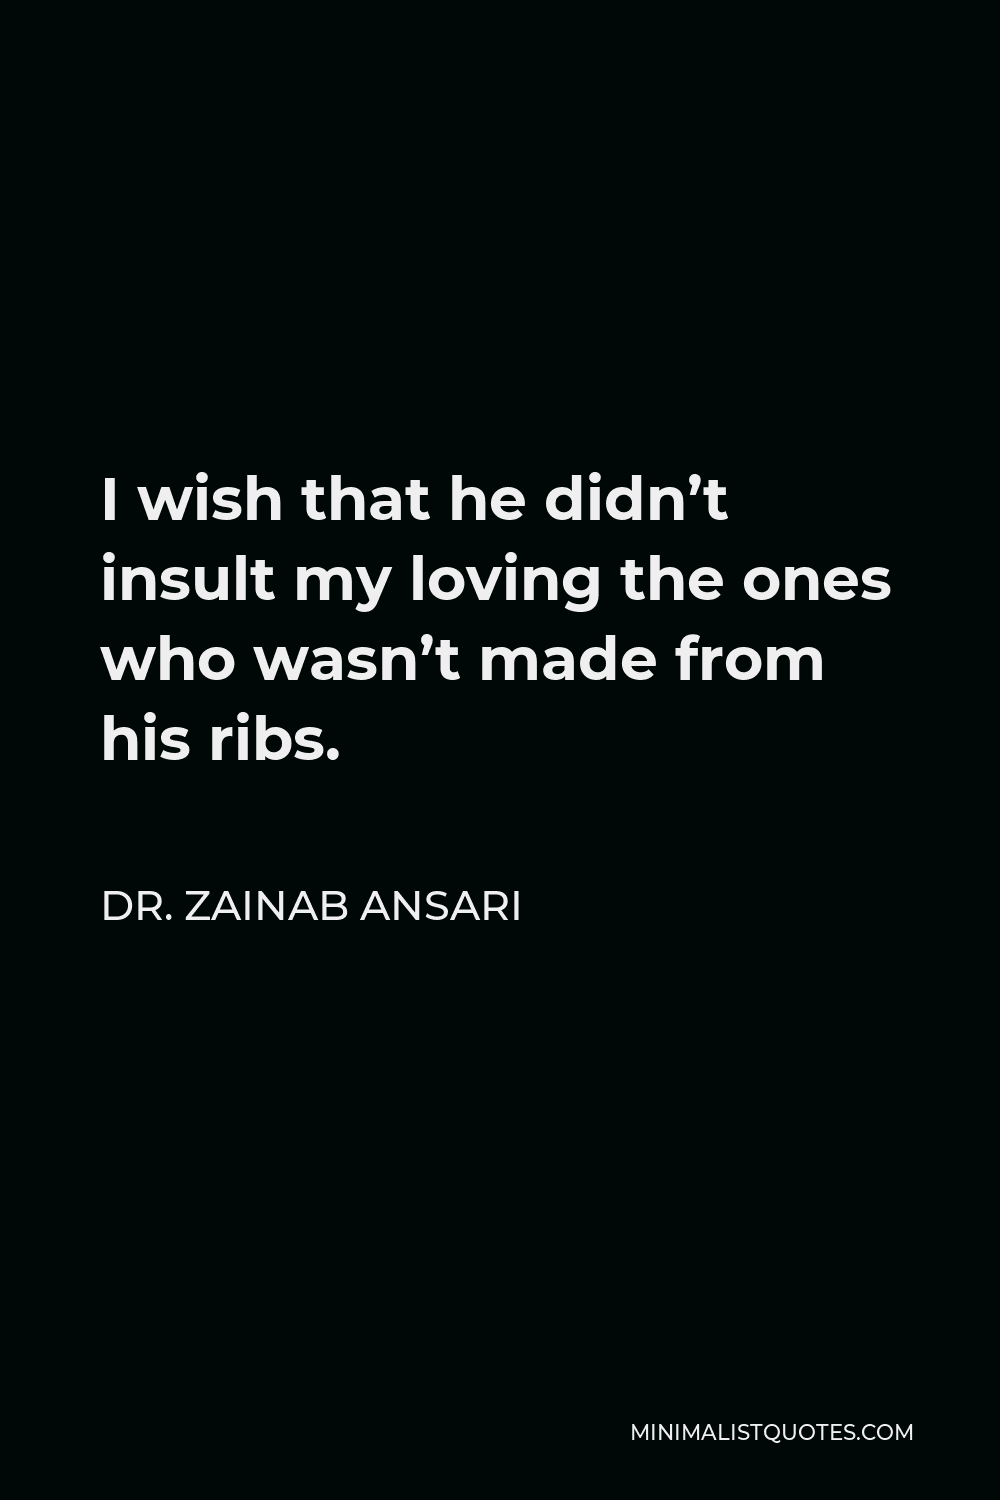 Dr. Zainab Ansari Quote - I wish that he didn’t insult my loving the ones who wasn’t made from his ribs.